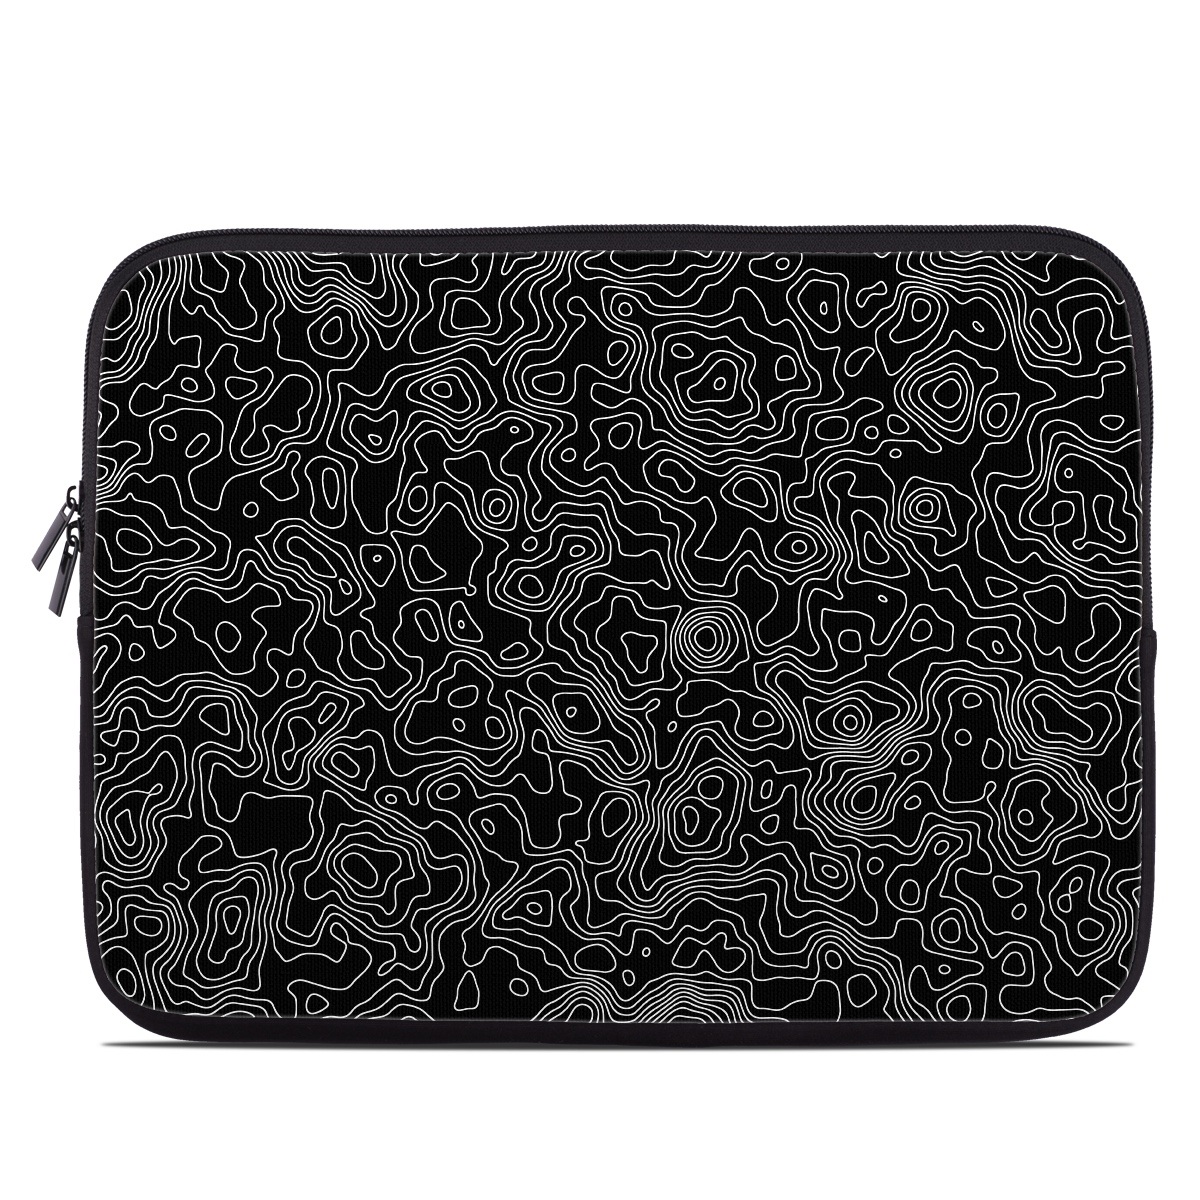 Laptop Sleeve - Nocturnal (Image 1)